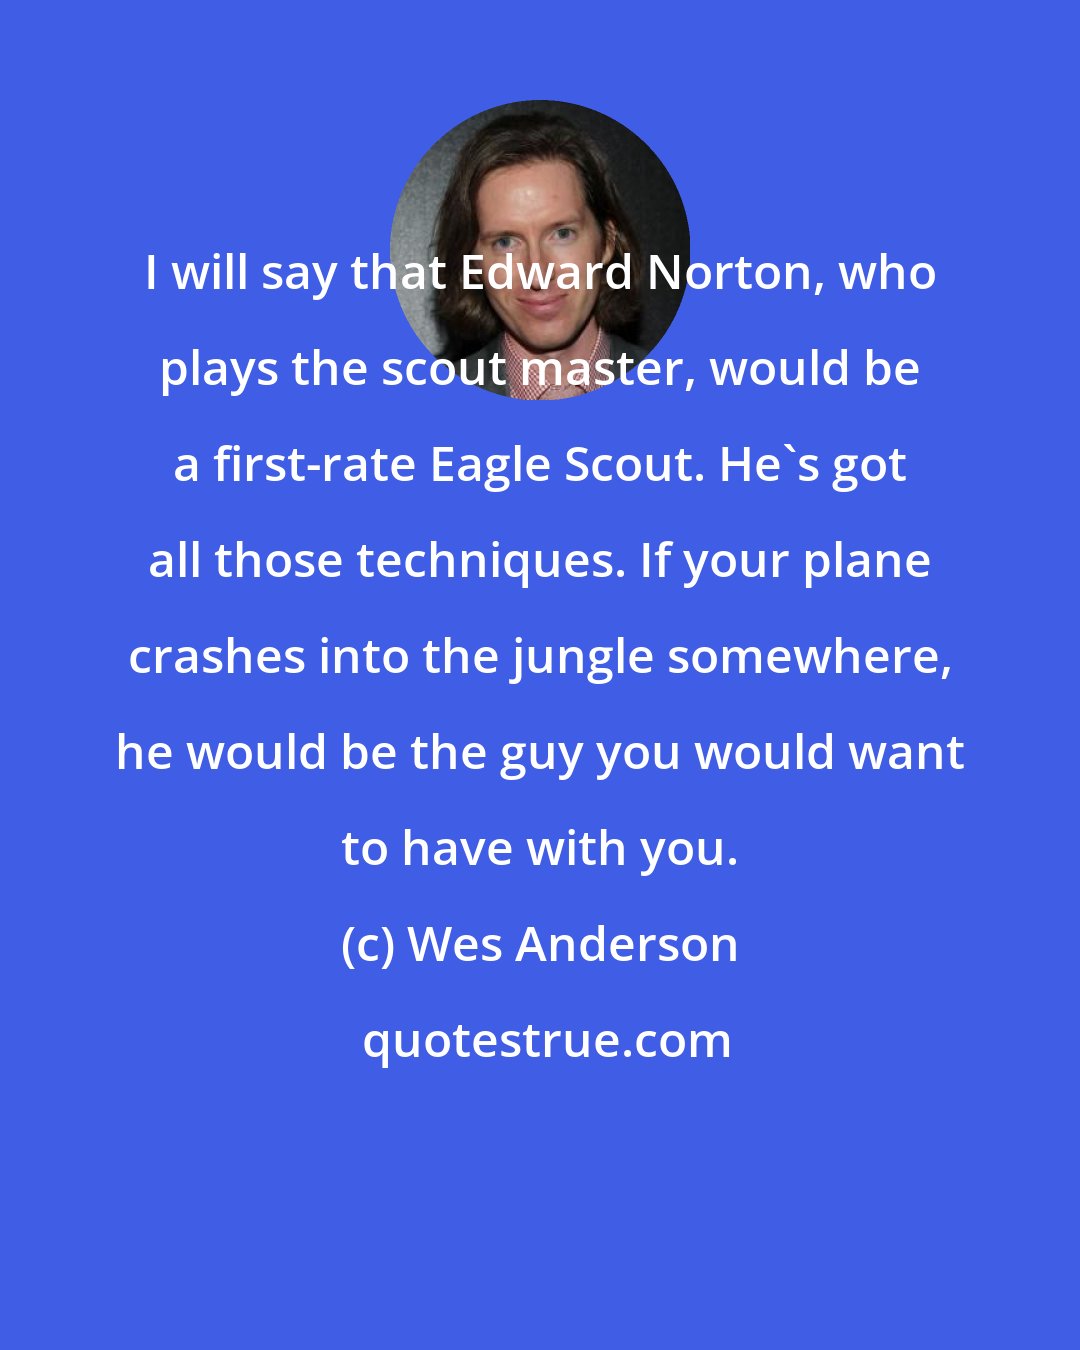 Wes Anderson: I will say that Edward Norton, who plays the scout master, would be a first-rate Eagle Scout. He's got all those techniques. If your plane crashes into the jungle somewhere, he would be the guy you would want to have with you.